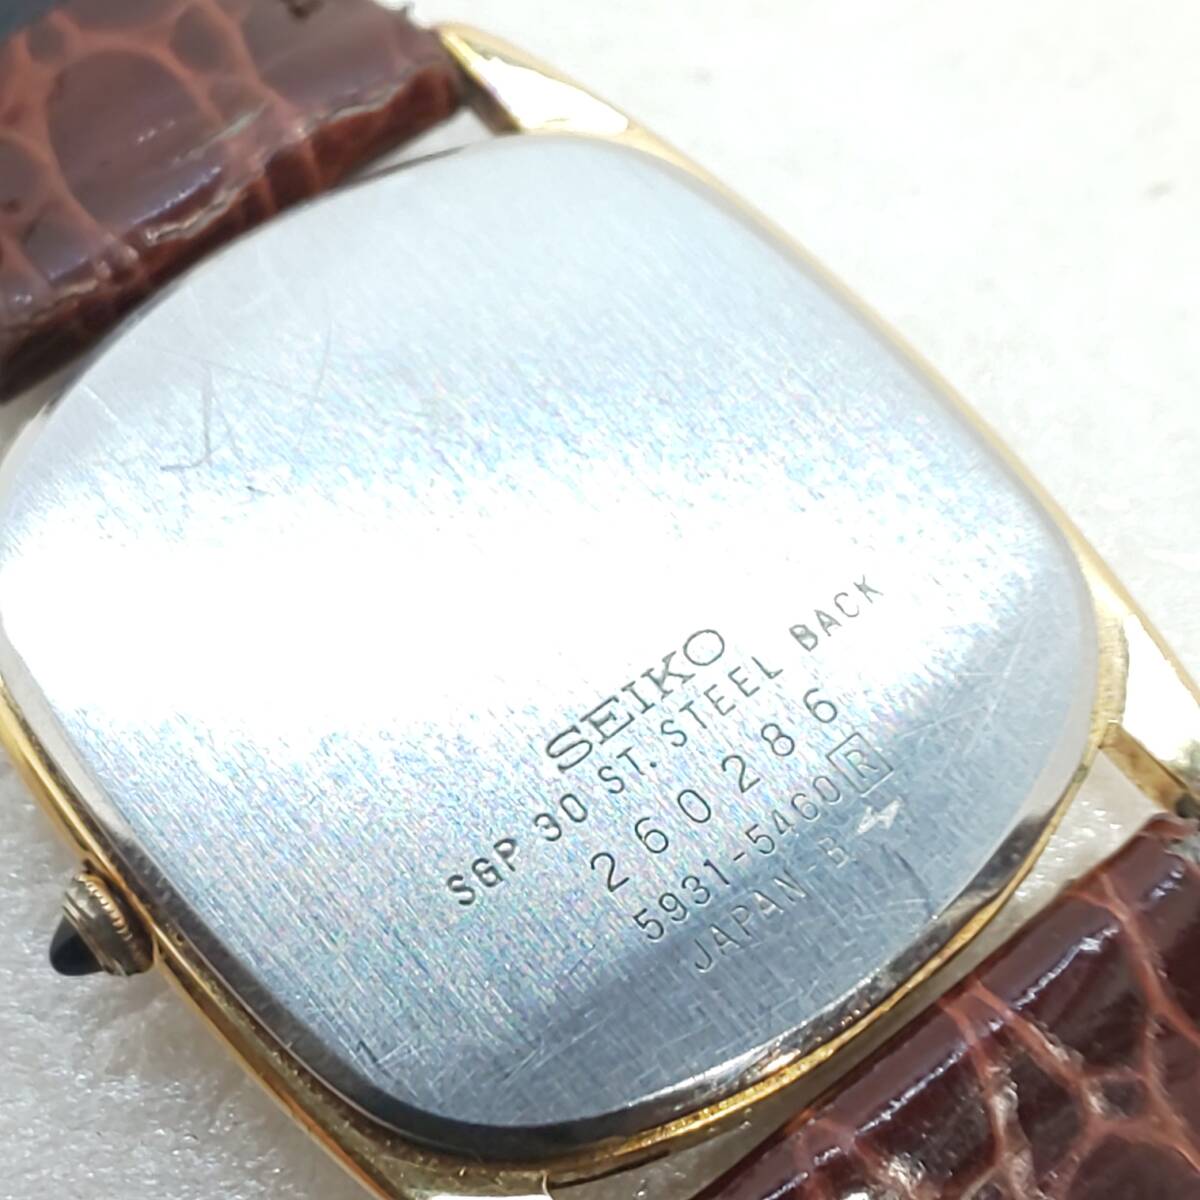 ** Seiko **SEIKO Dolce 5931-5460 Dolce Gold face SGP30 case men's wristwatch battery replaced * collection emission 